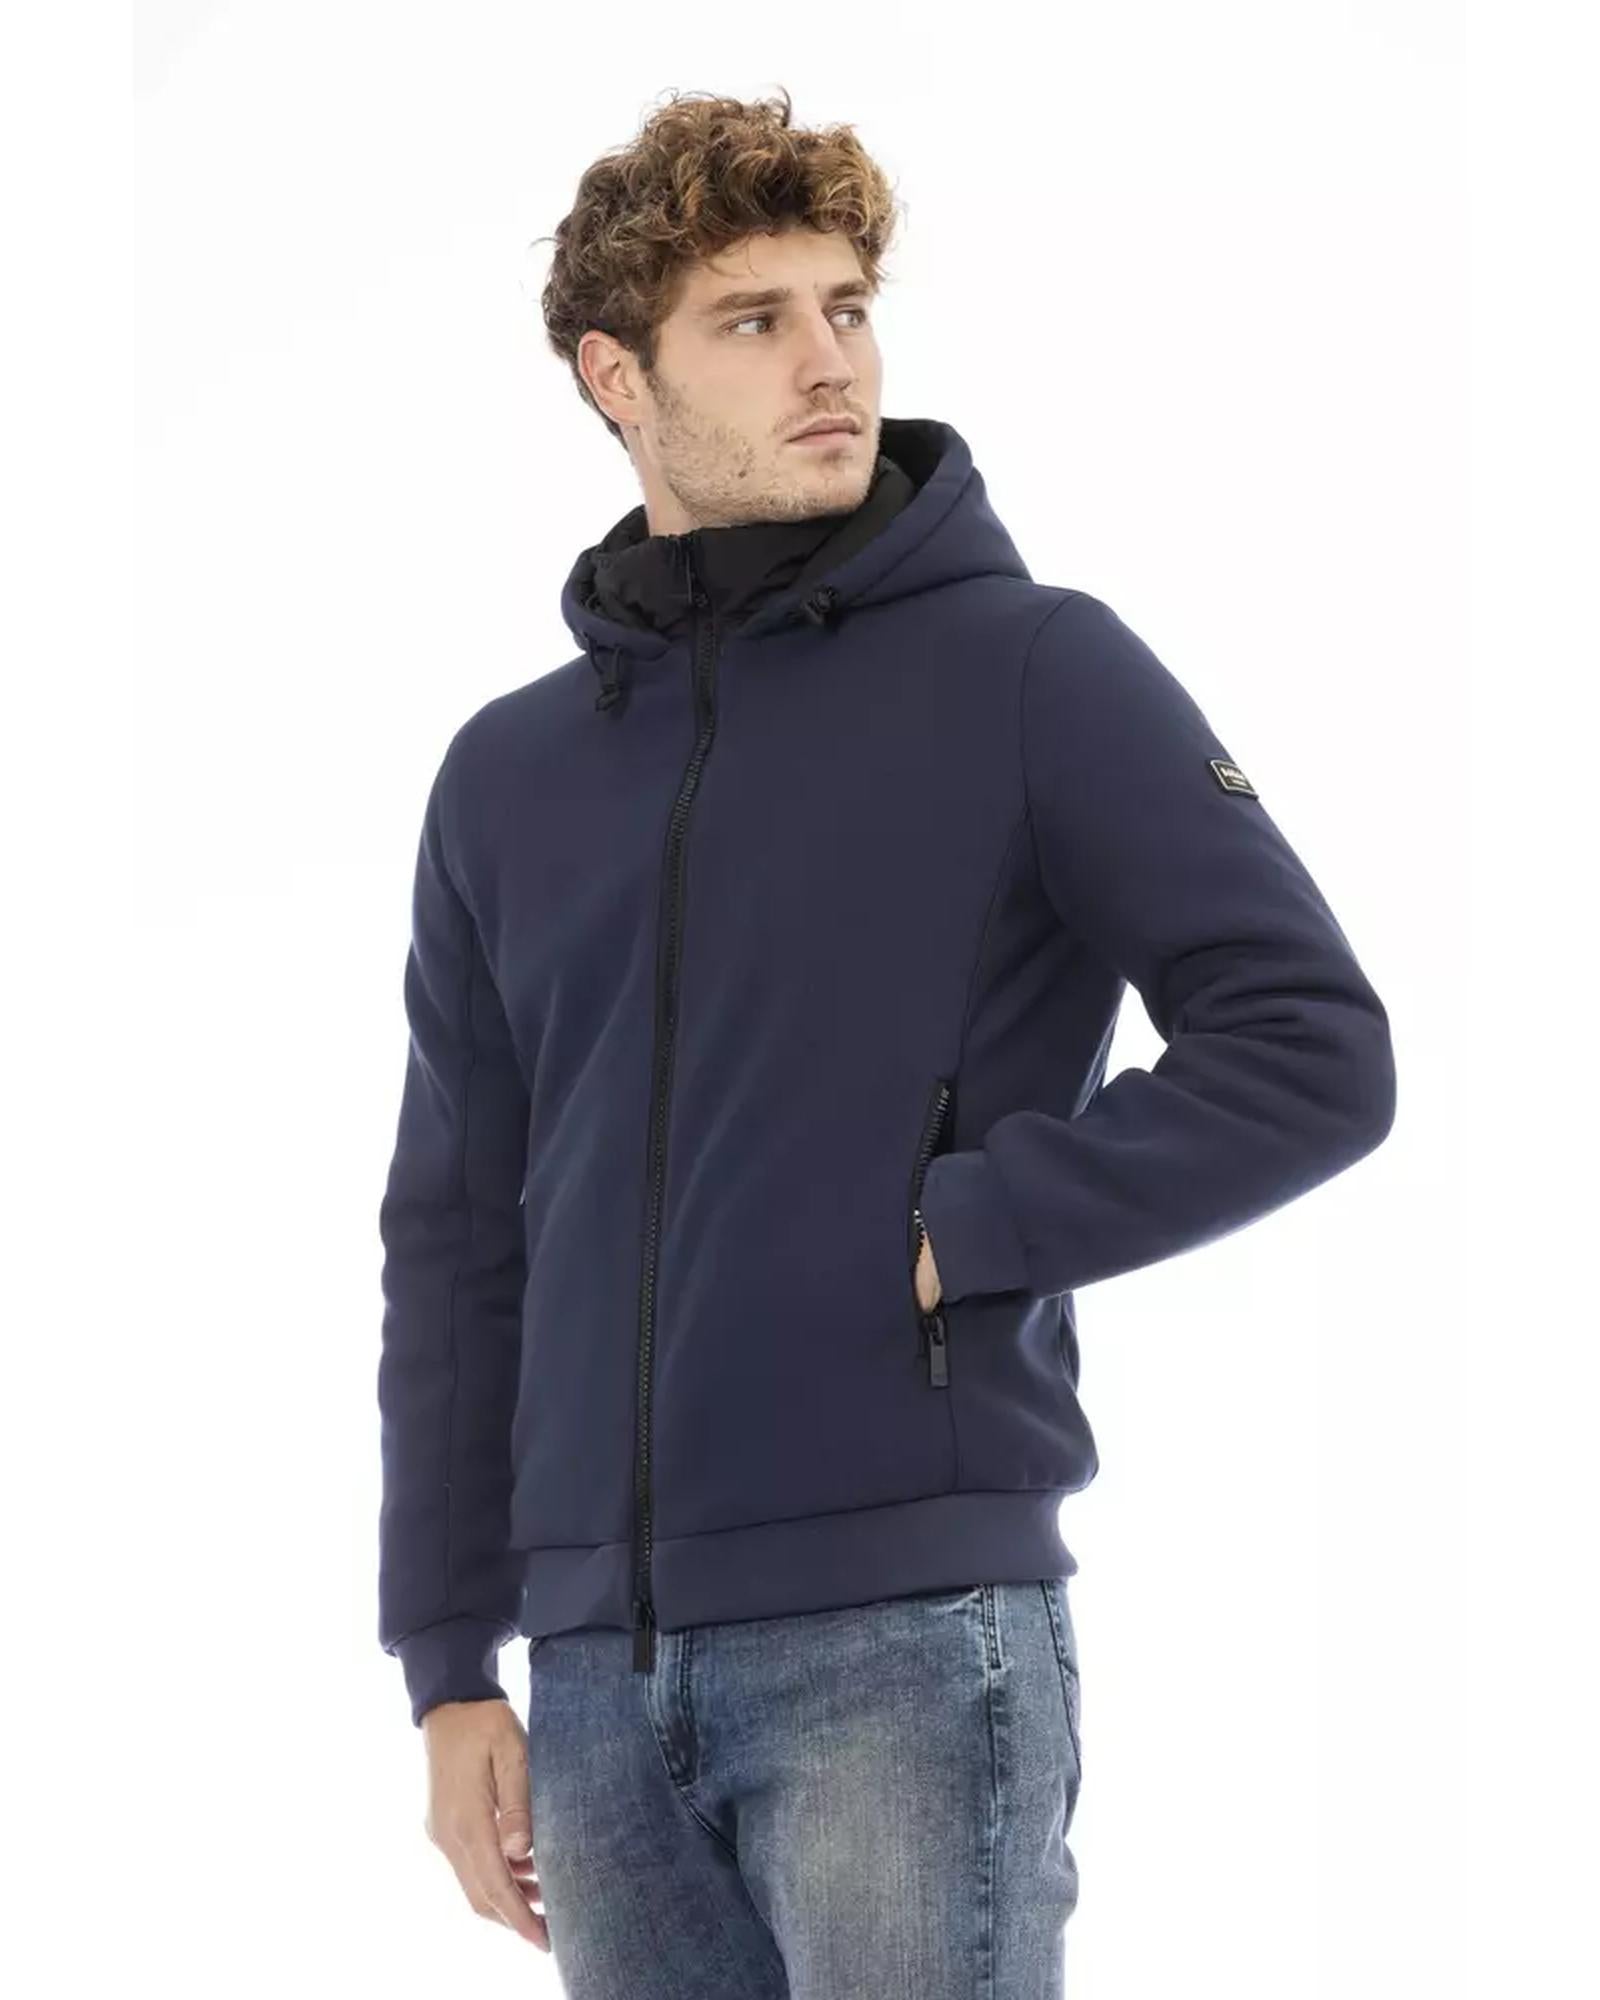 Threaded Pocket Jacket with Double Breasted Front Closure M Men